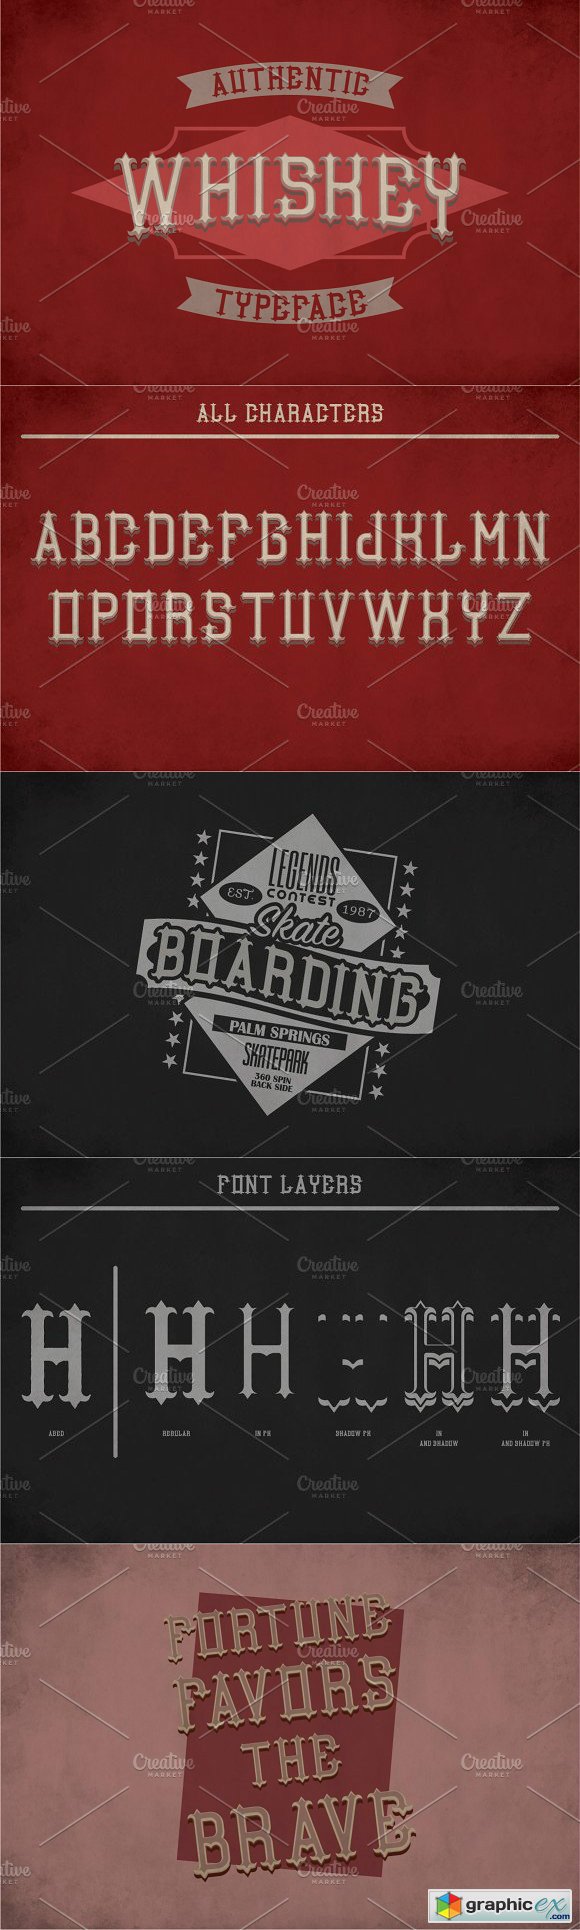 Authentic Whiskey Label Typeface Font Display